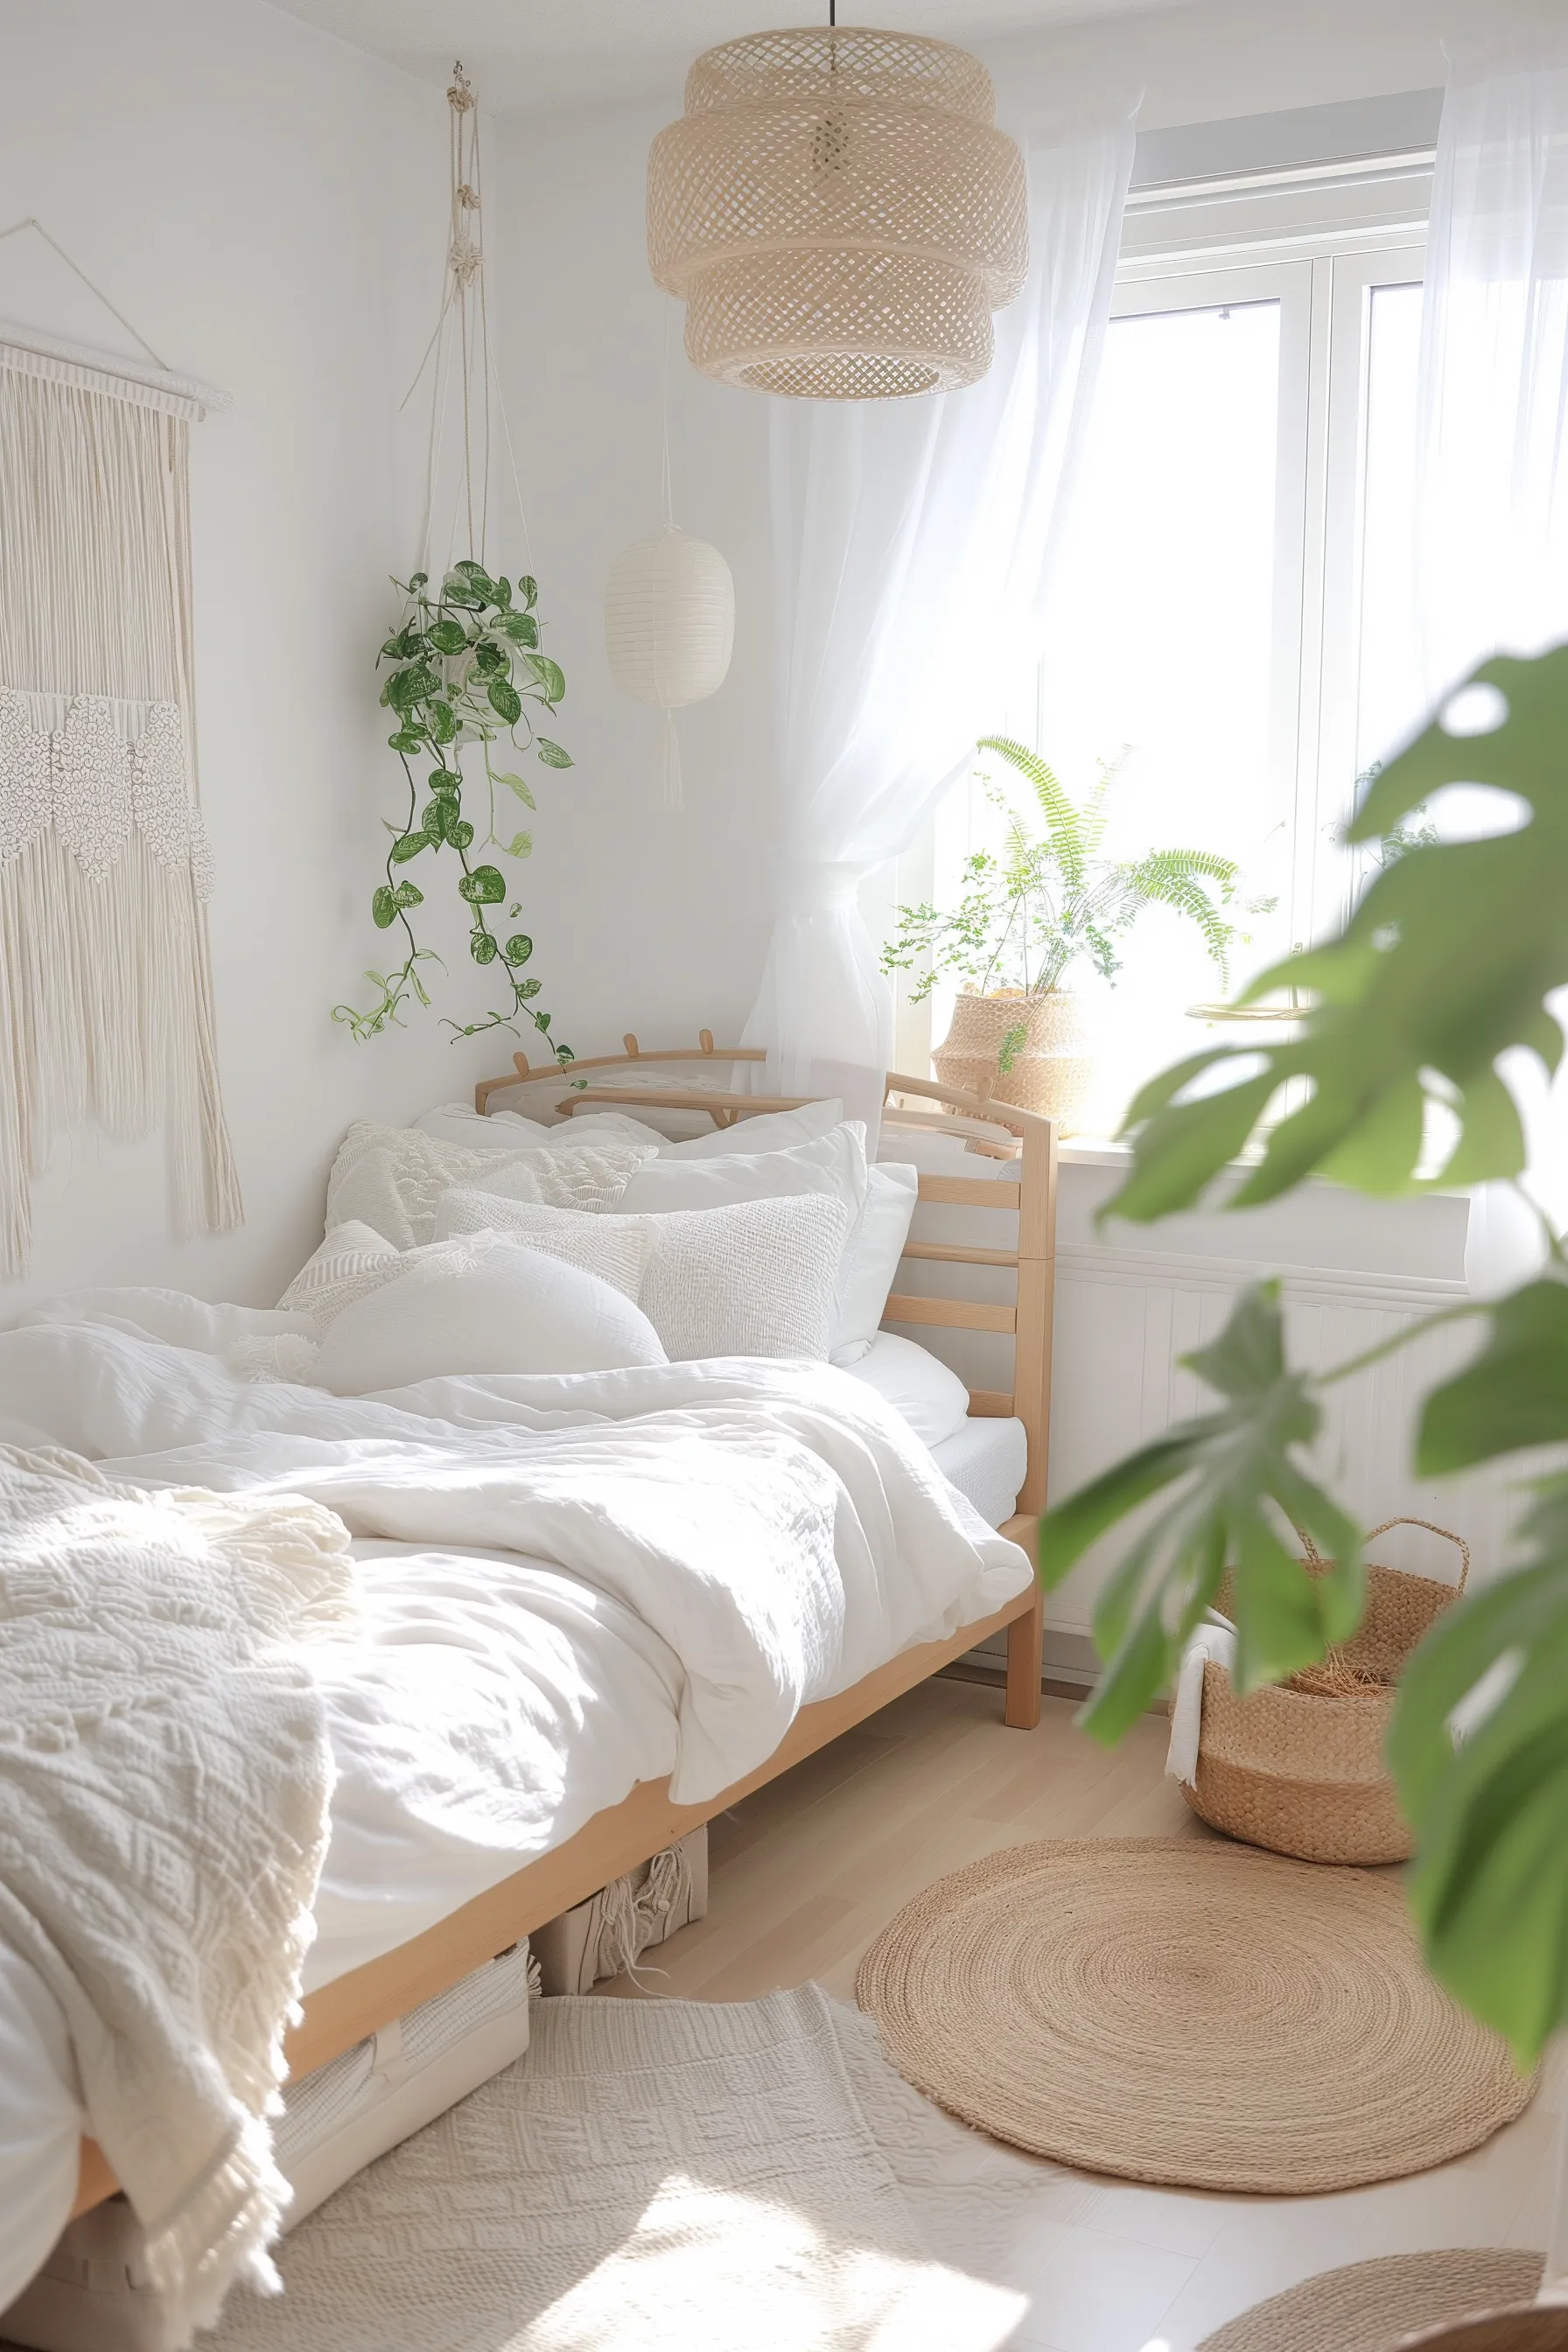 A bohemian style childs bedroom with woven furniture, white bedding and plants